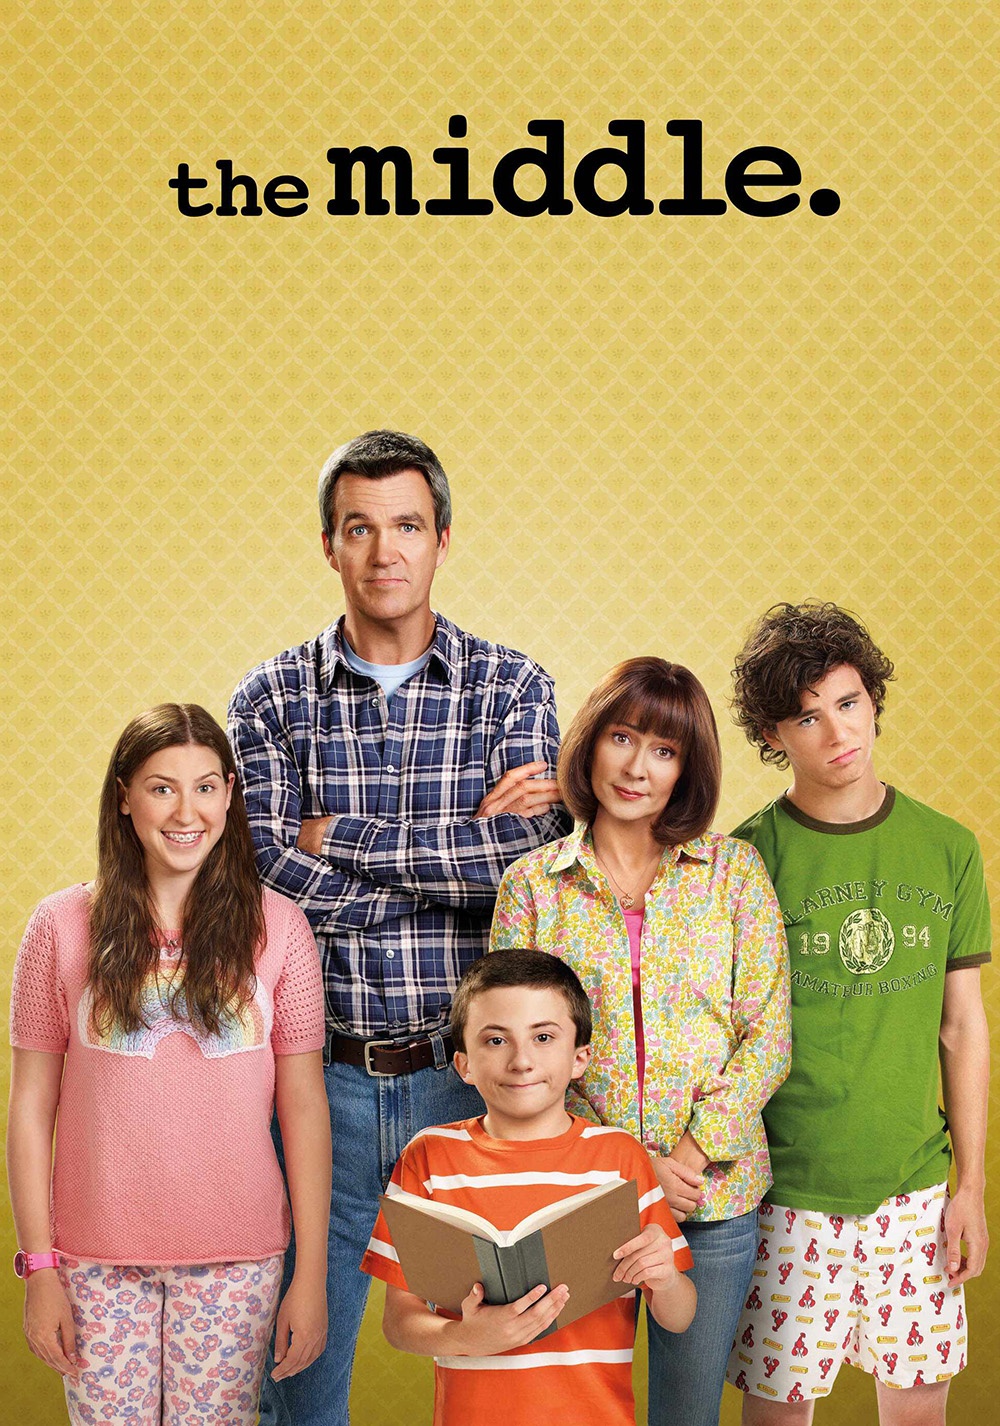 Why American Sitcom “The Middle” is One of the Best Family Comedies Ever 5